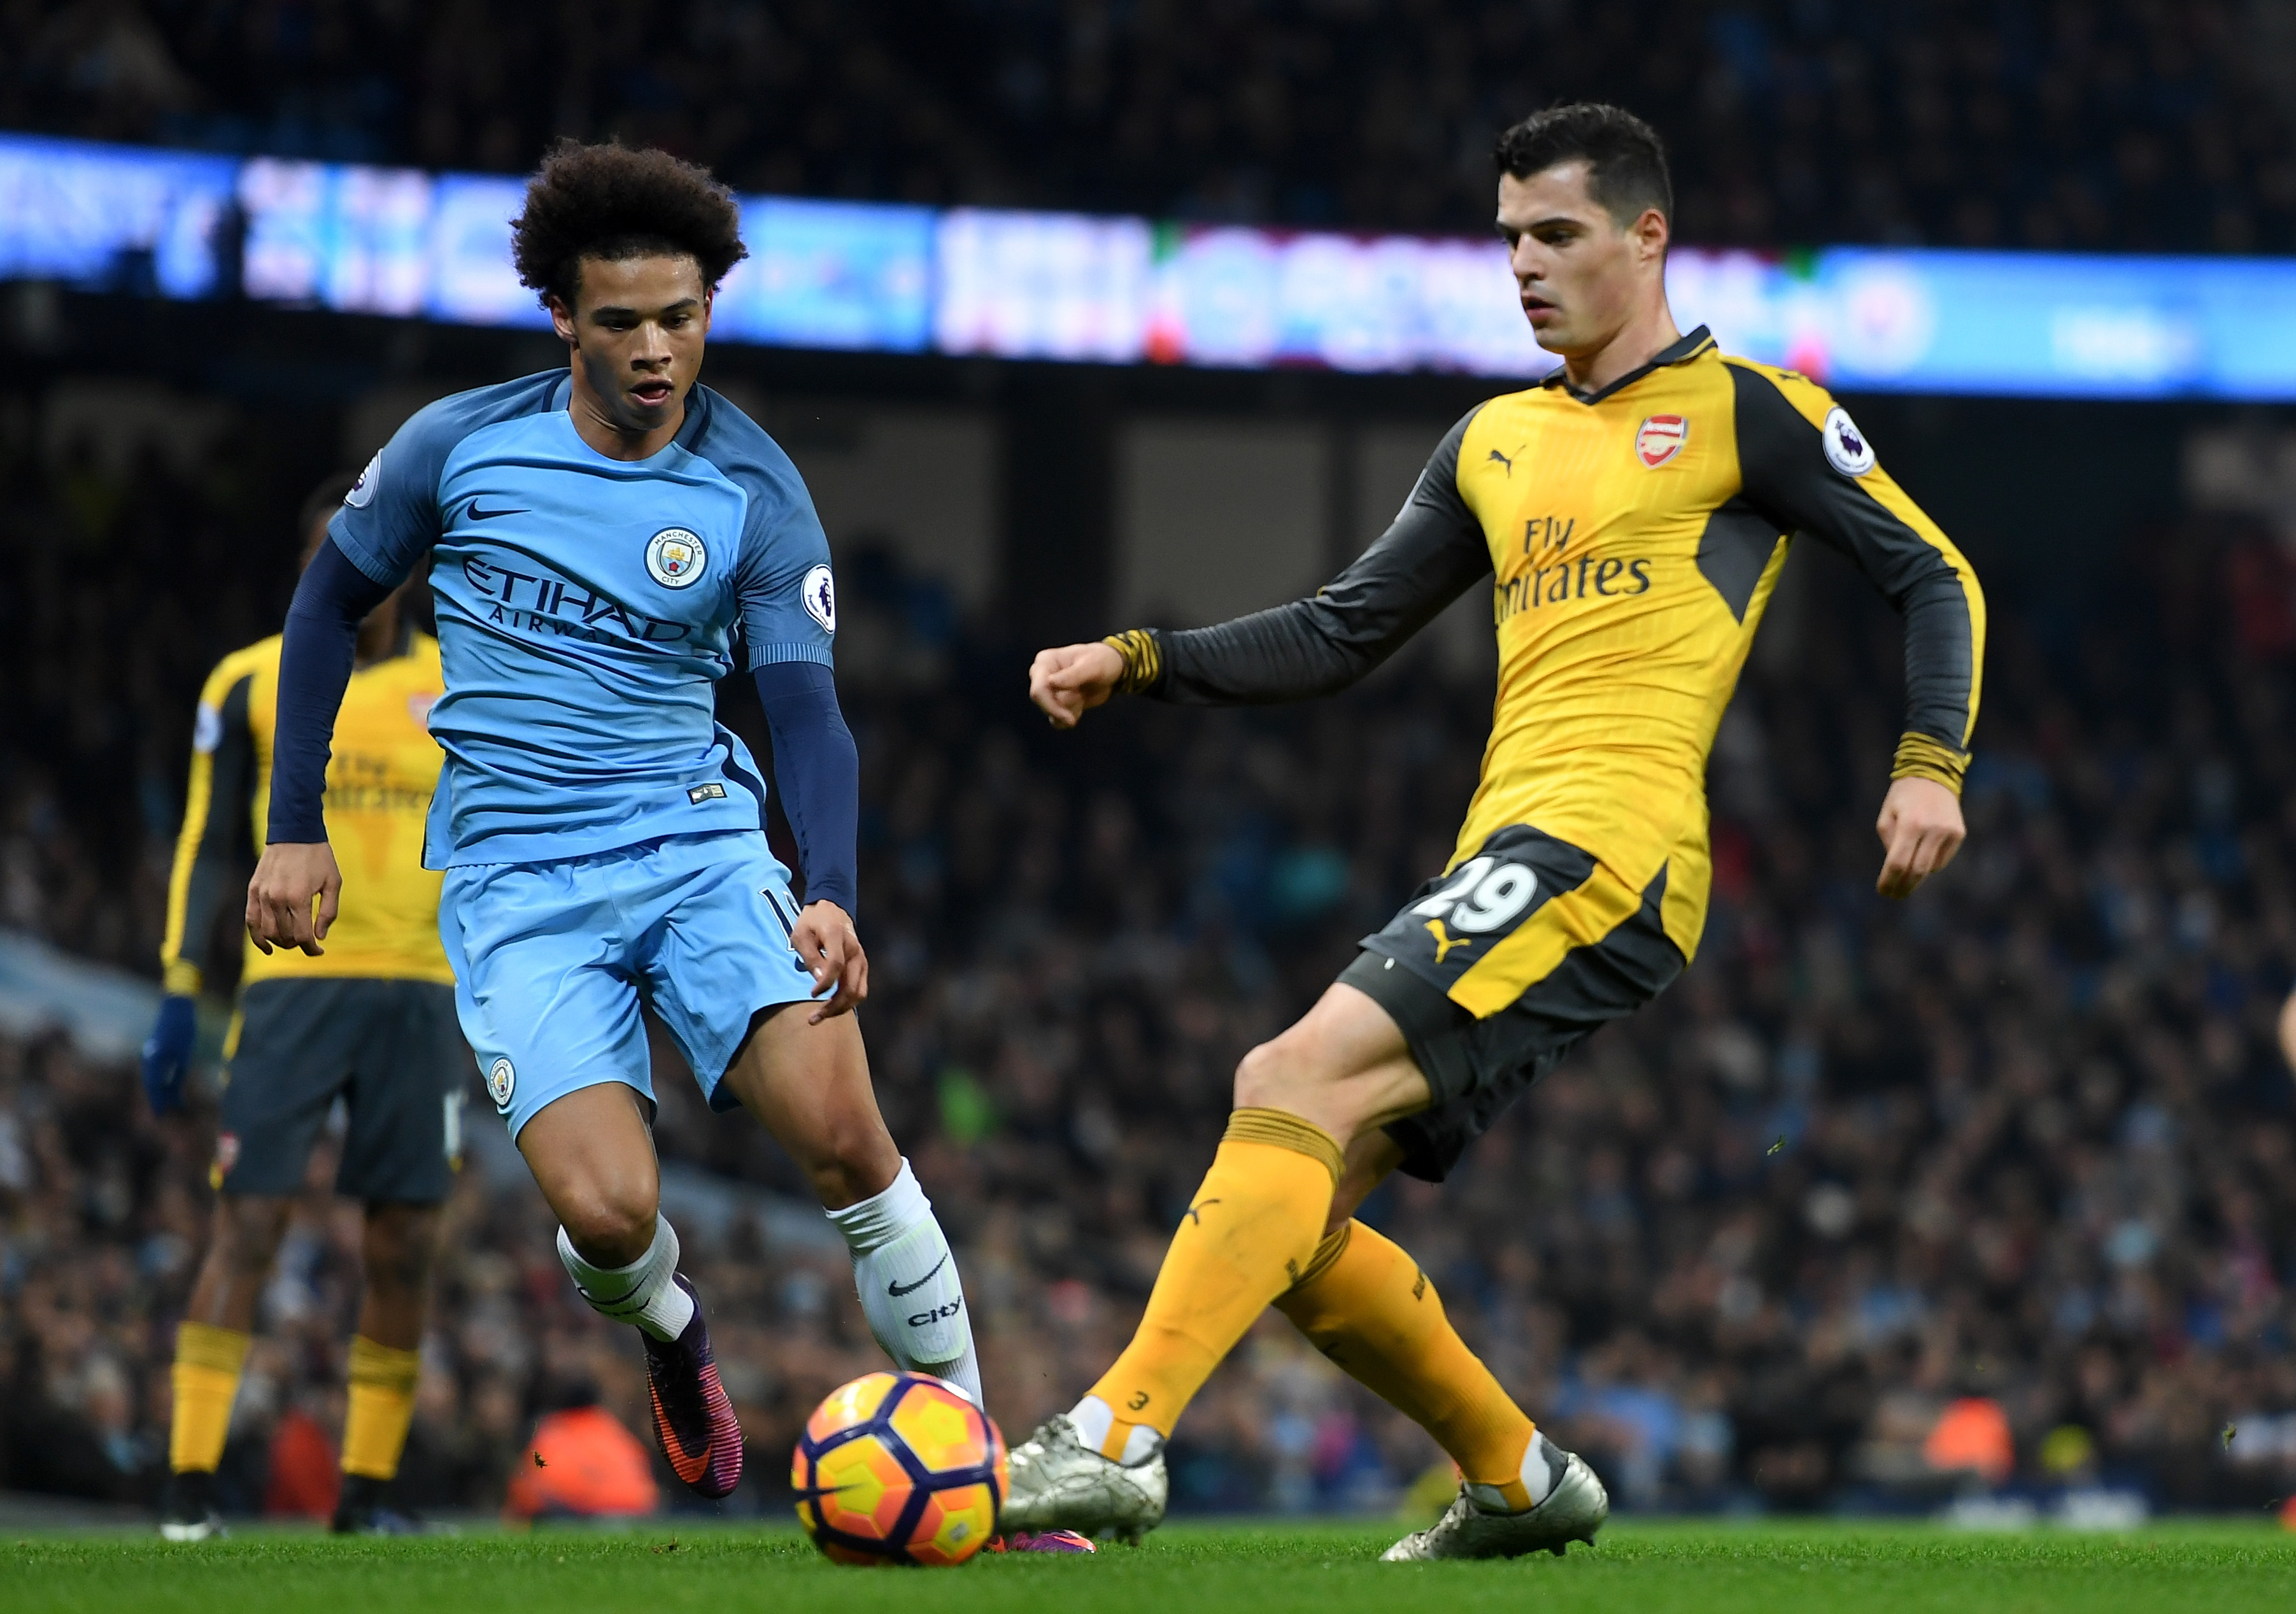 MANCHESTER, ENGLAND - DECEMBER 18: Granit Xhaka of Arsenal (R) is put under pressure from Leroy Sane of Manchester City (L) during the Premier League match between Manchester City and Arsenal at the Etihad Stadium on December 18, 2016 in Manchester, England.  (Photo by Michael Regan/Getty Images)